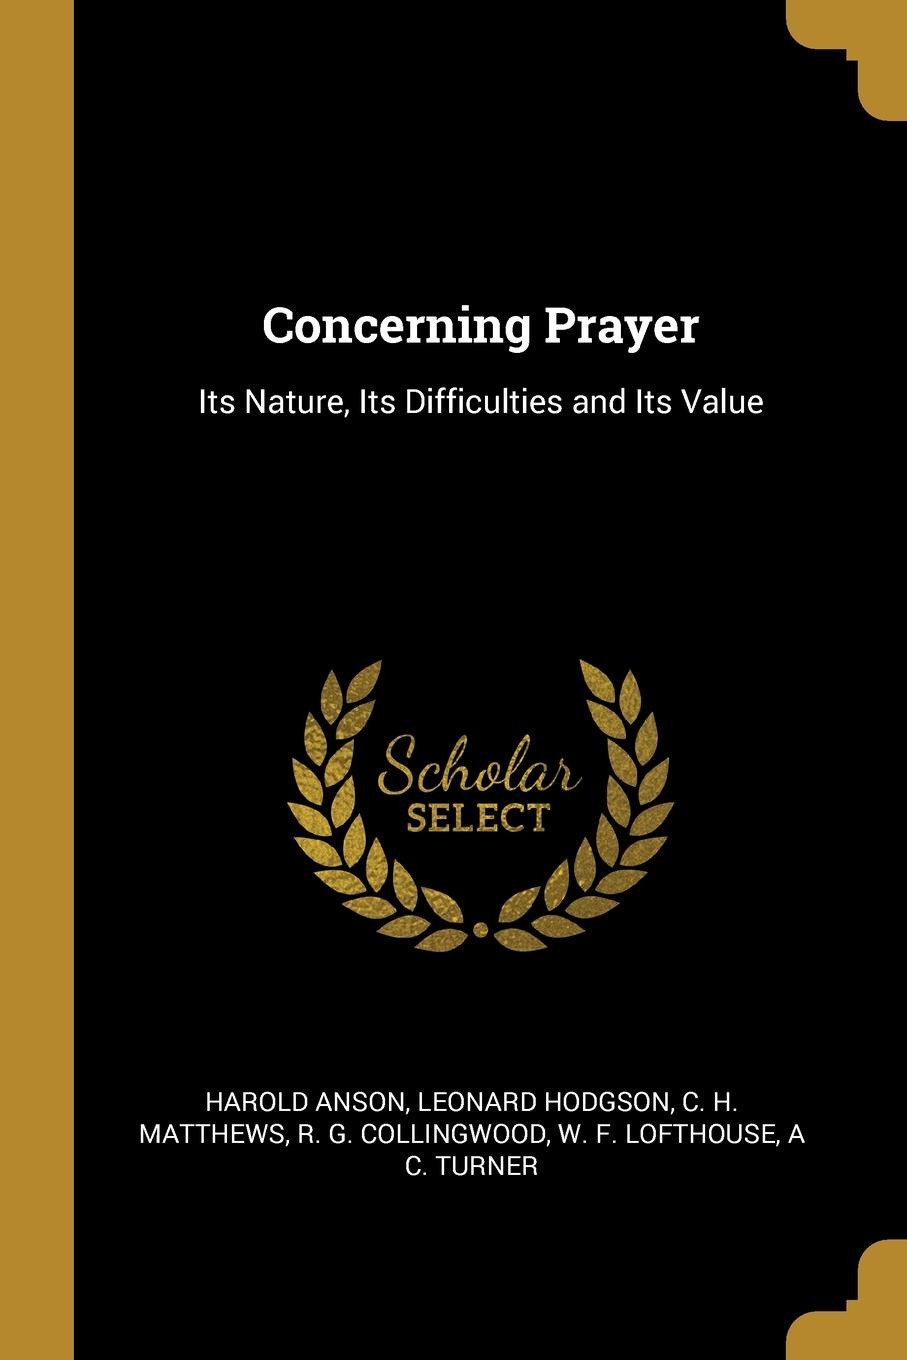 Concerning Prayer. Its Nature, Its Difficulties and Its Value